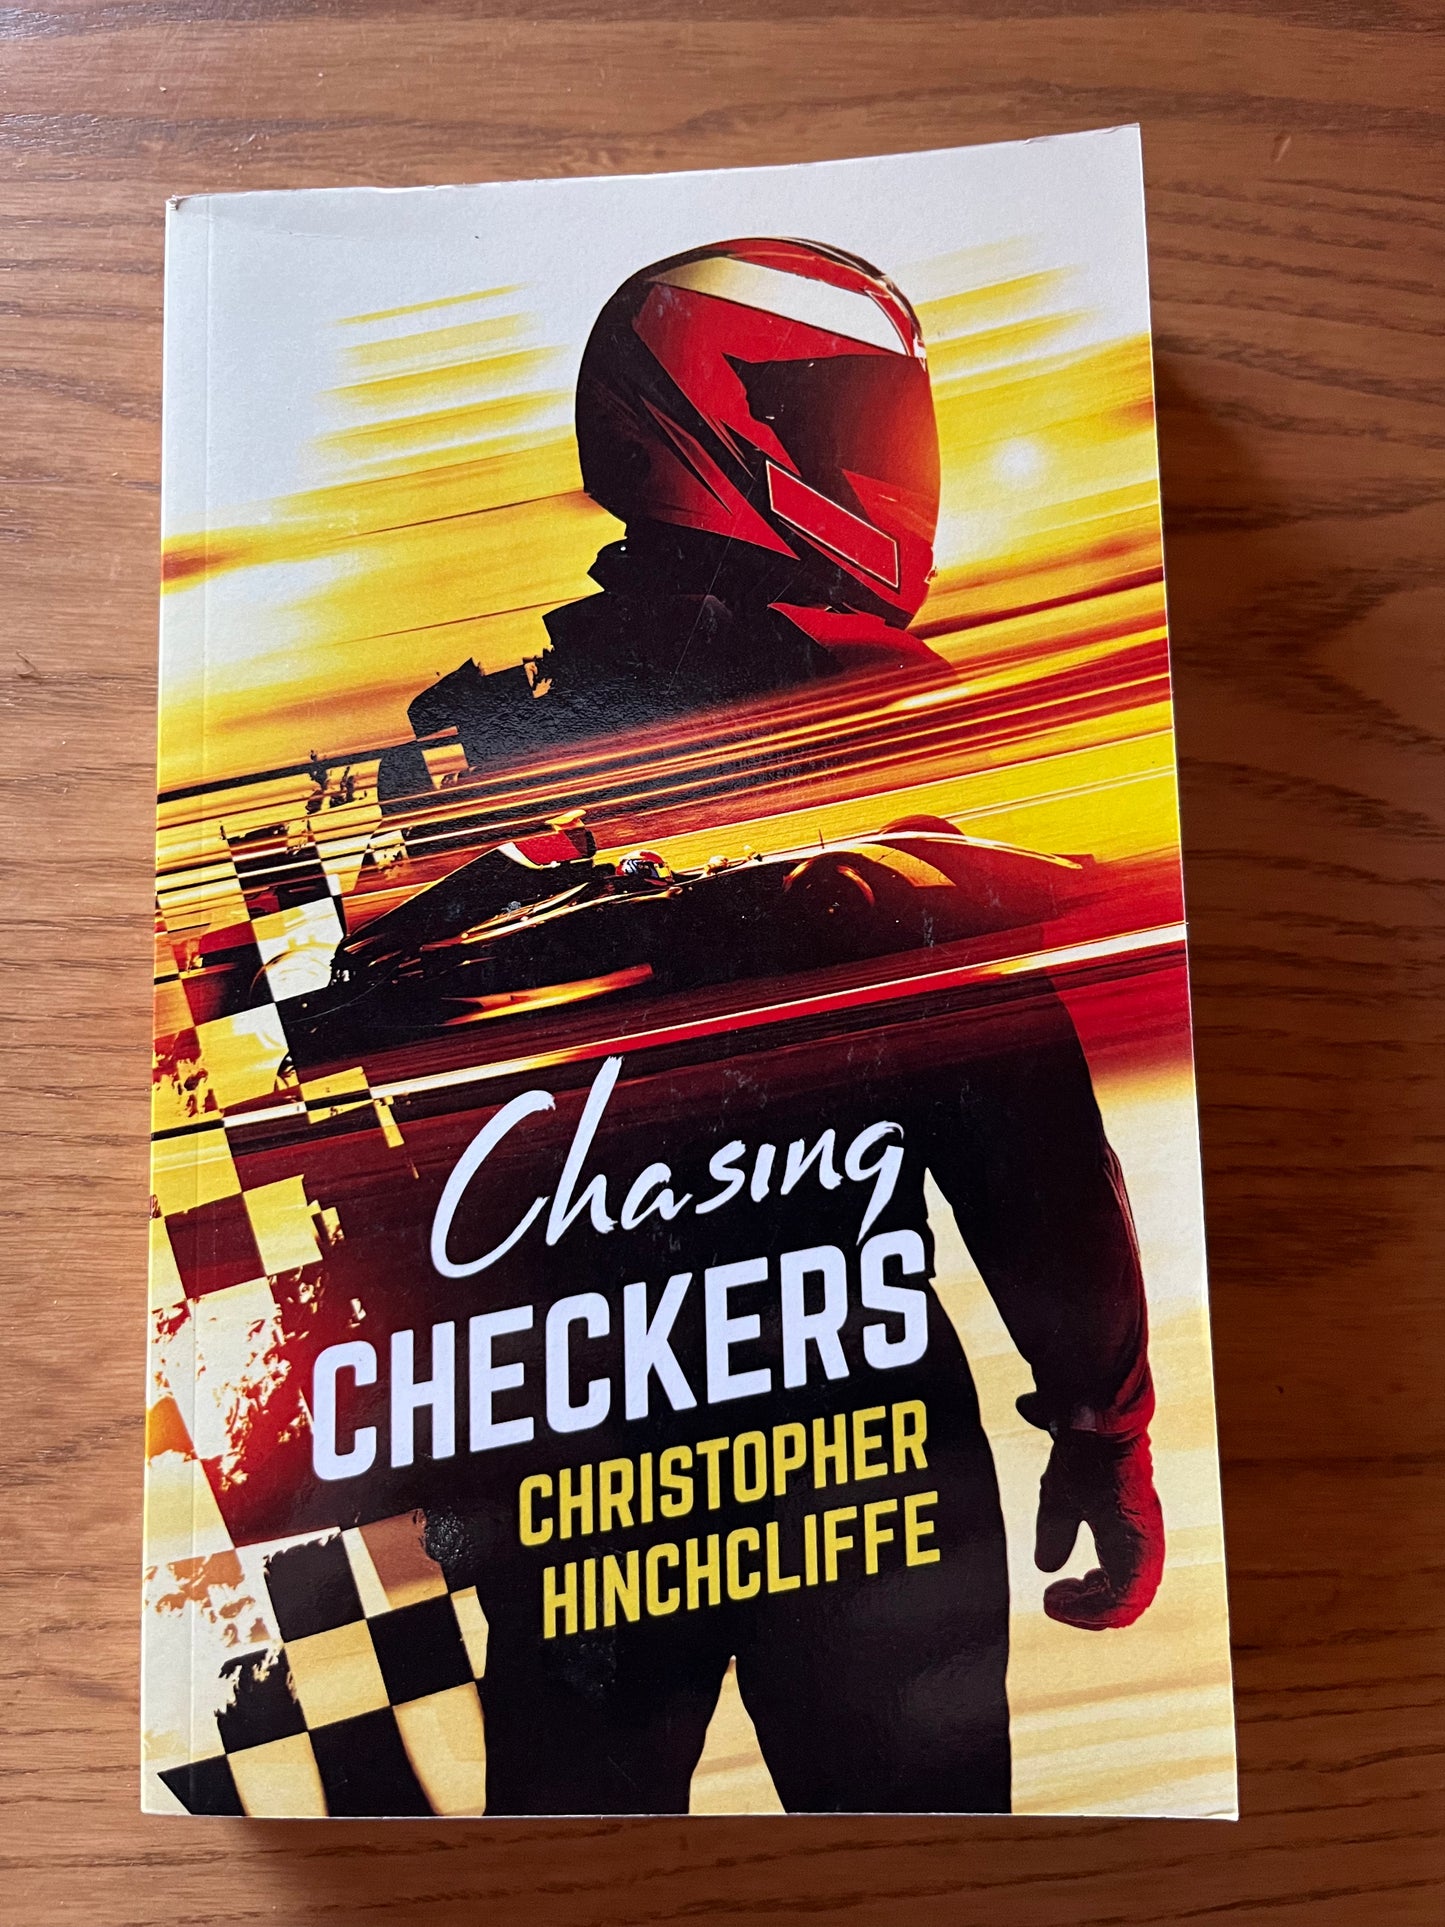 CHASING CHECKERS by Christopher Hinchcliffe (autographed book)